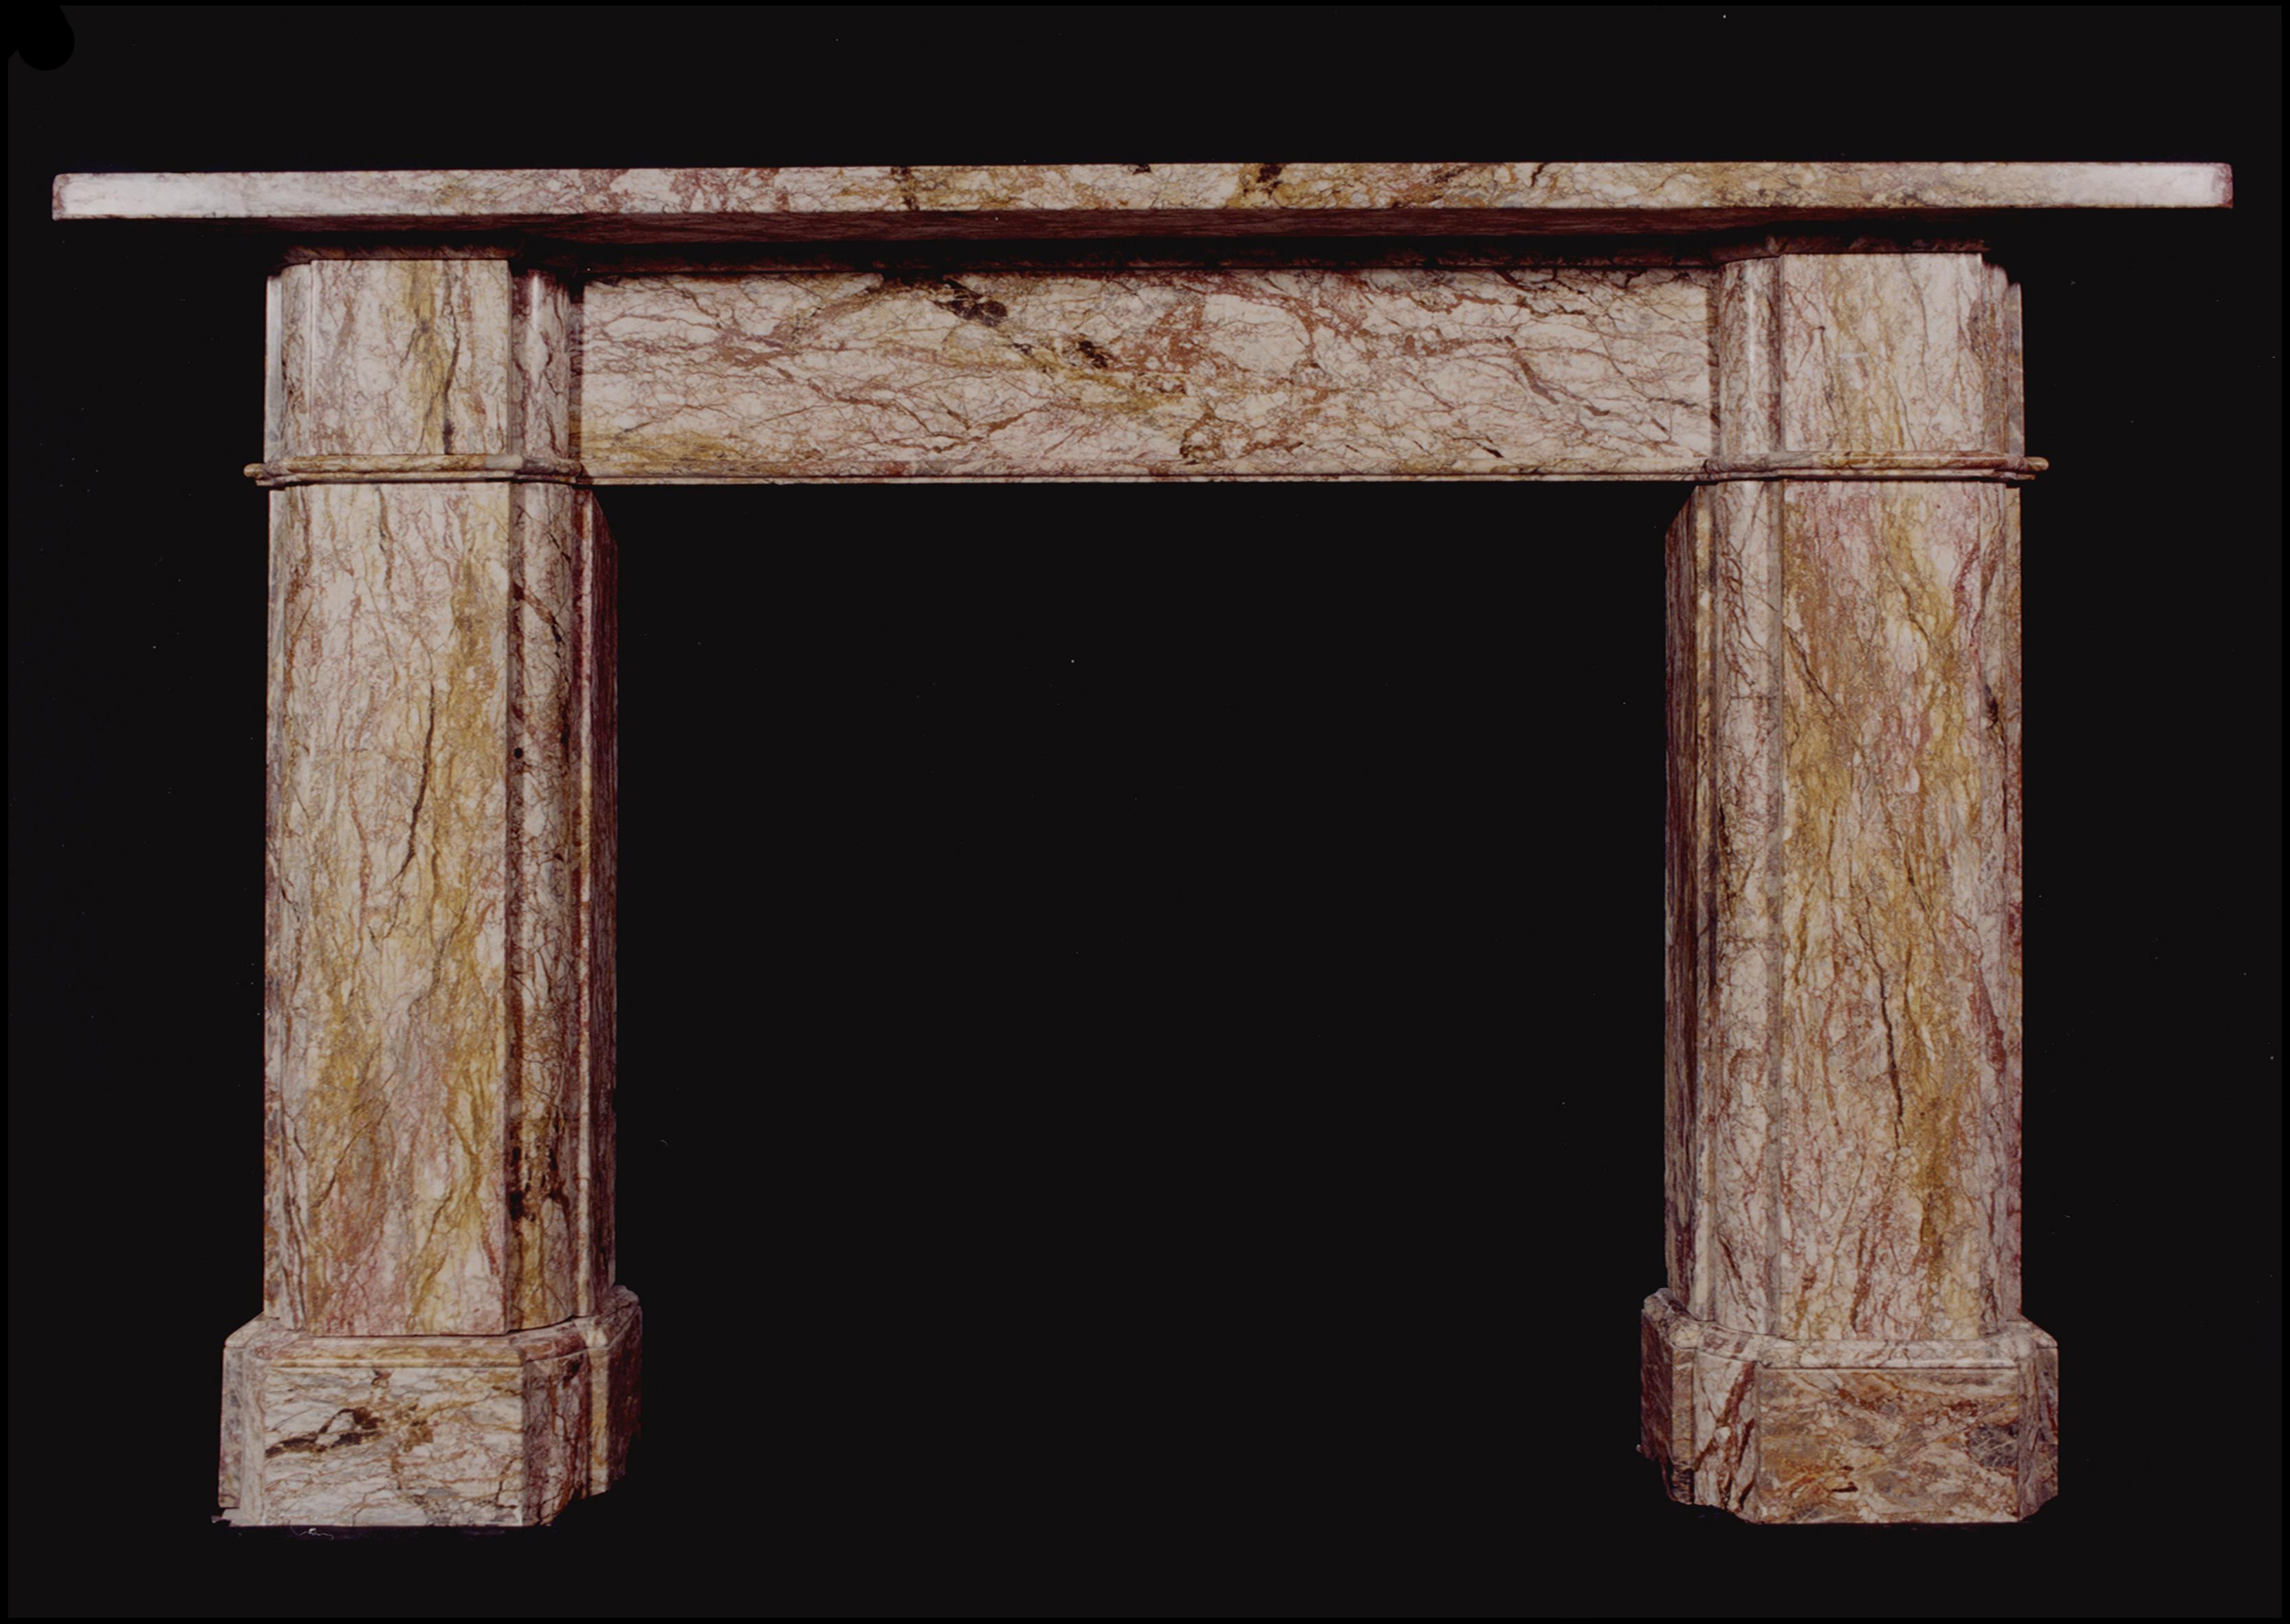 A mid-19th century coloured marble Victorian architectural fireplace with plain moulded frieze and jambs.

Measures: 
Shelf Width:	1880 mm      	74 in
Overall Height:	1230 mm      	48 3/8 in
Opening Height:	970 mm      	38 1/4 in
Opening Width:	1030